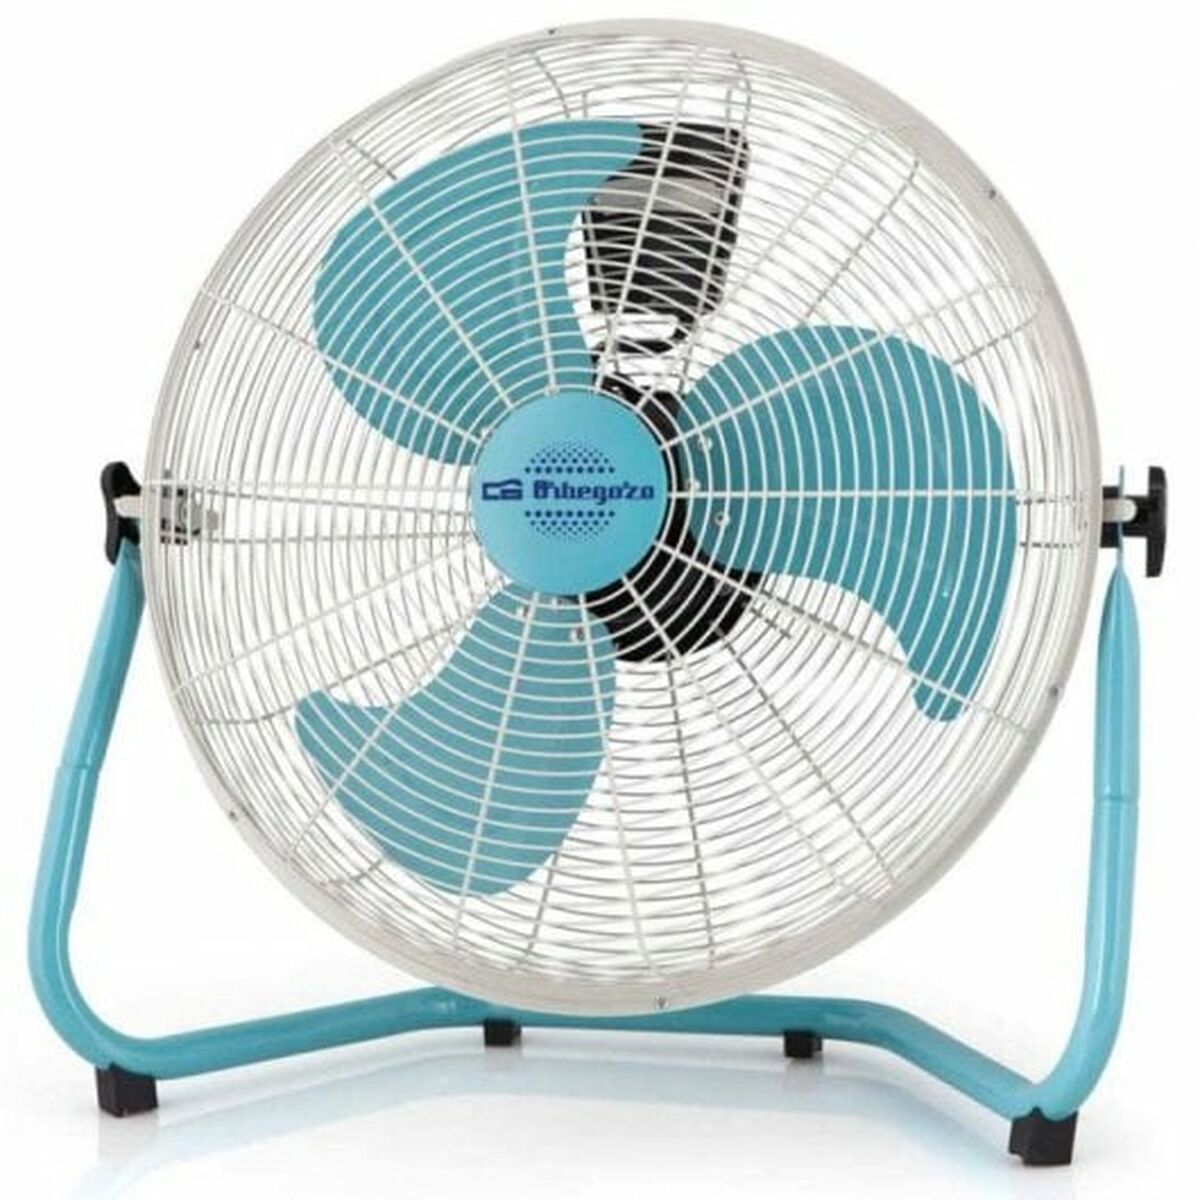 Table Fan Orbegozo PW 1546 130 W, Orbegozo, Home and cooking, Portable air conditioning, table-fan-orbegozo-pw-1546-130-w, Brand_Orbegozo, category-reference-2399, category-reference-2450, category-reference-2451, category-reference-t-19656, category-reference-t-21087, category-reference-t-25217, category-reference-t-29129, Condition_NEW, ferretería, Price_50 - 100, summer, RiotNook